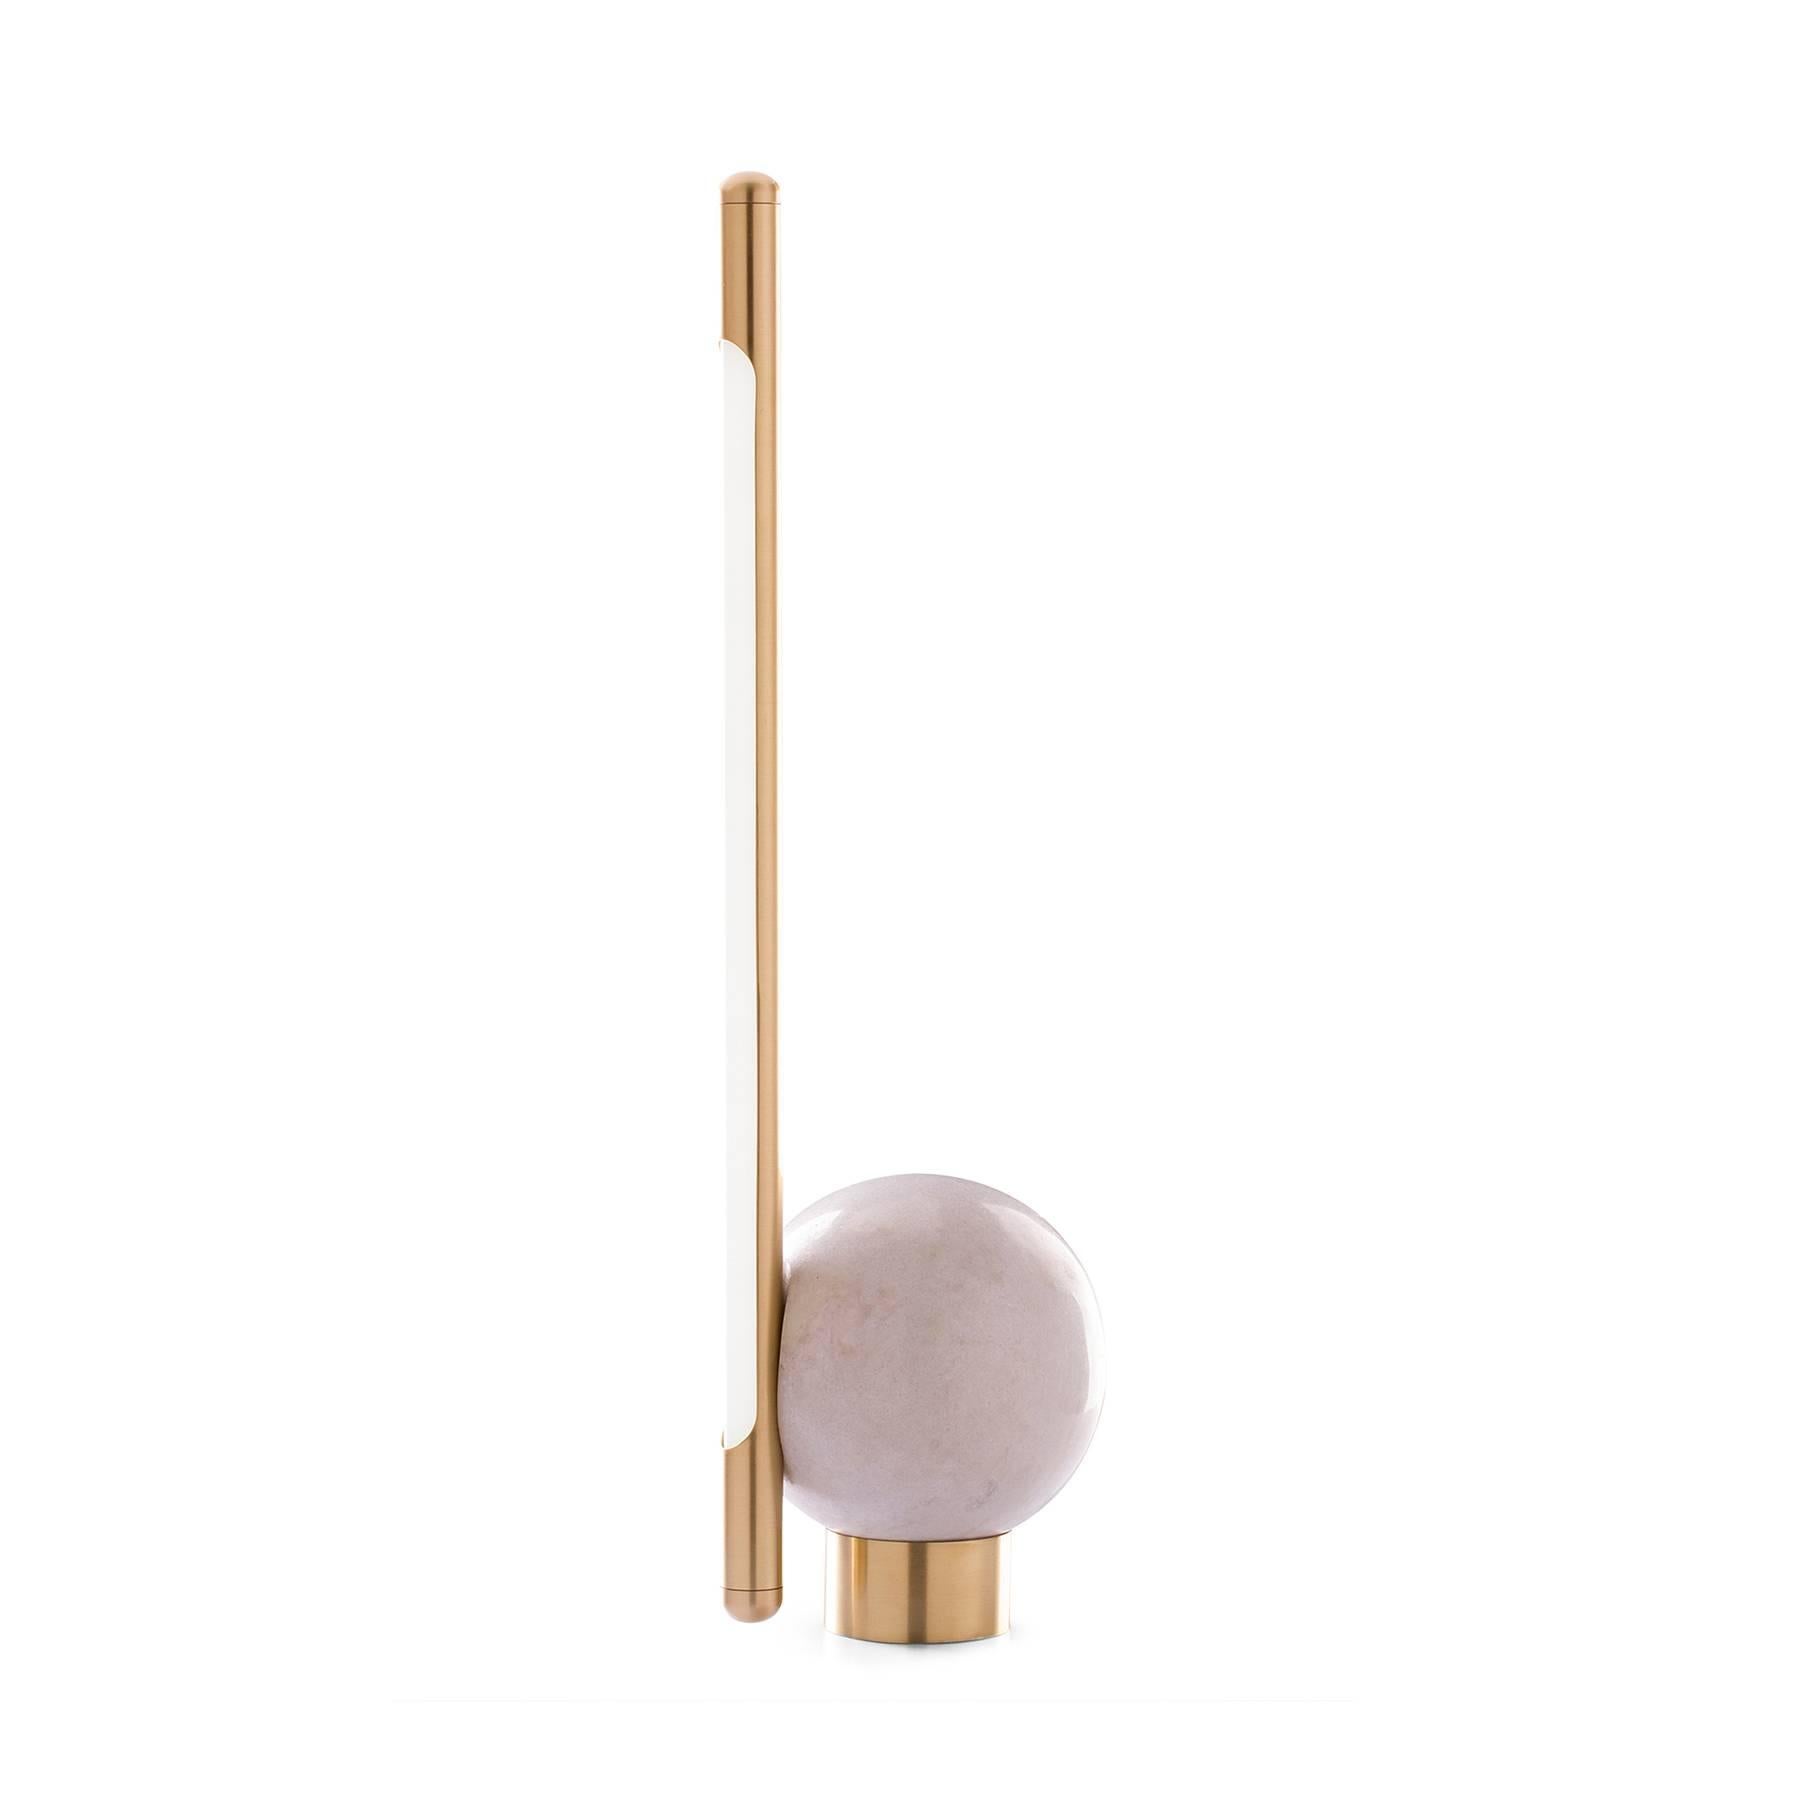 The Bubble is a table lamp designed to be interactive with the user. Executed with a sphere carved by hand from a block of marble found in the state of Espirito Santo, Brazil, has a brushed brass rod with a LED lamp inside. The adjustment is made